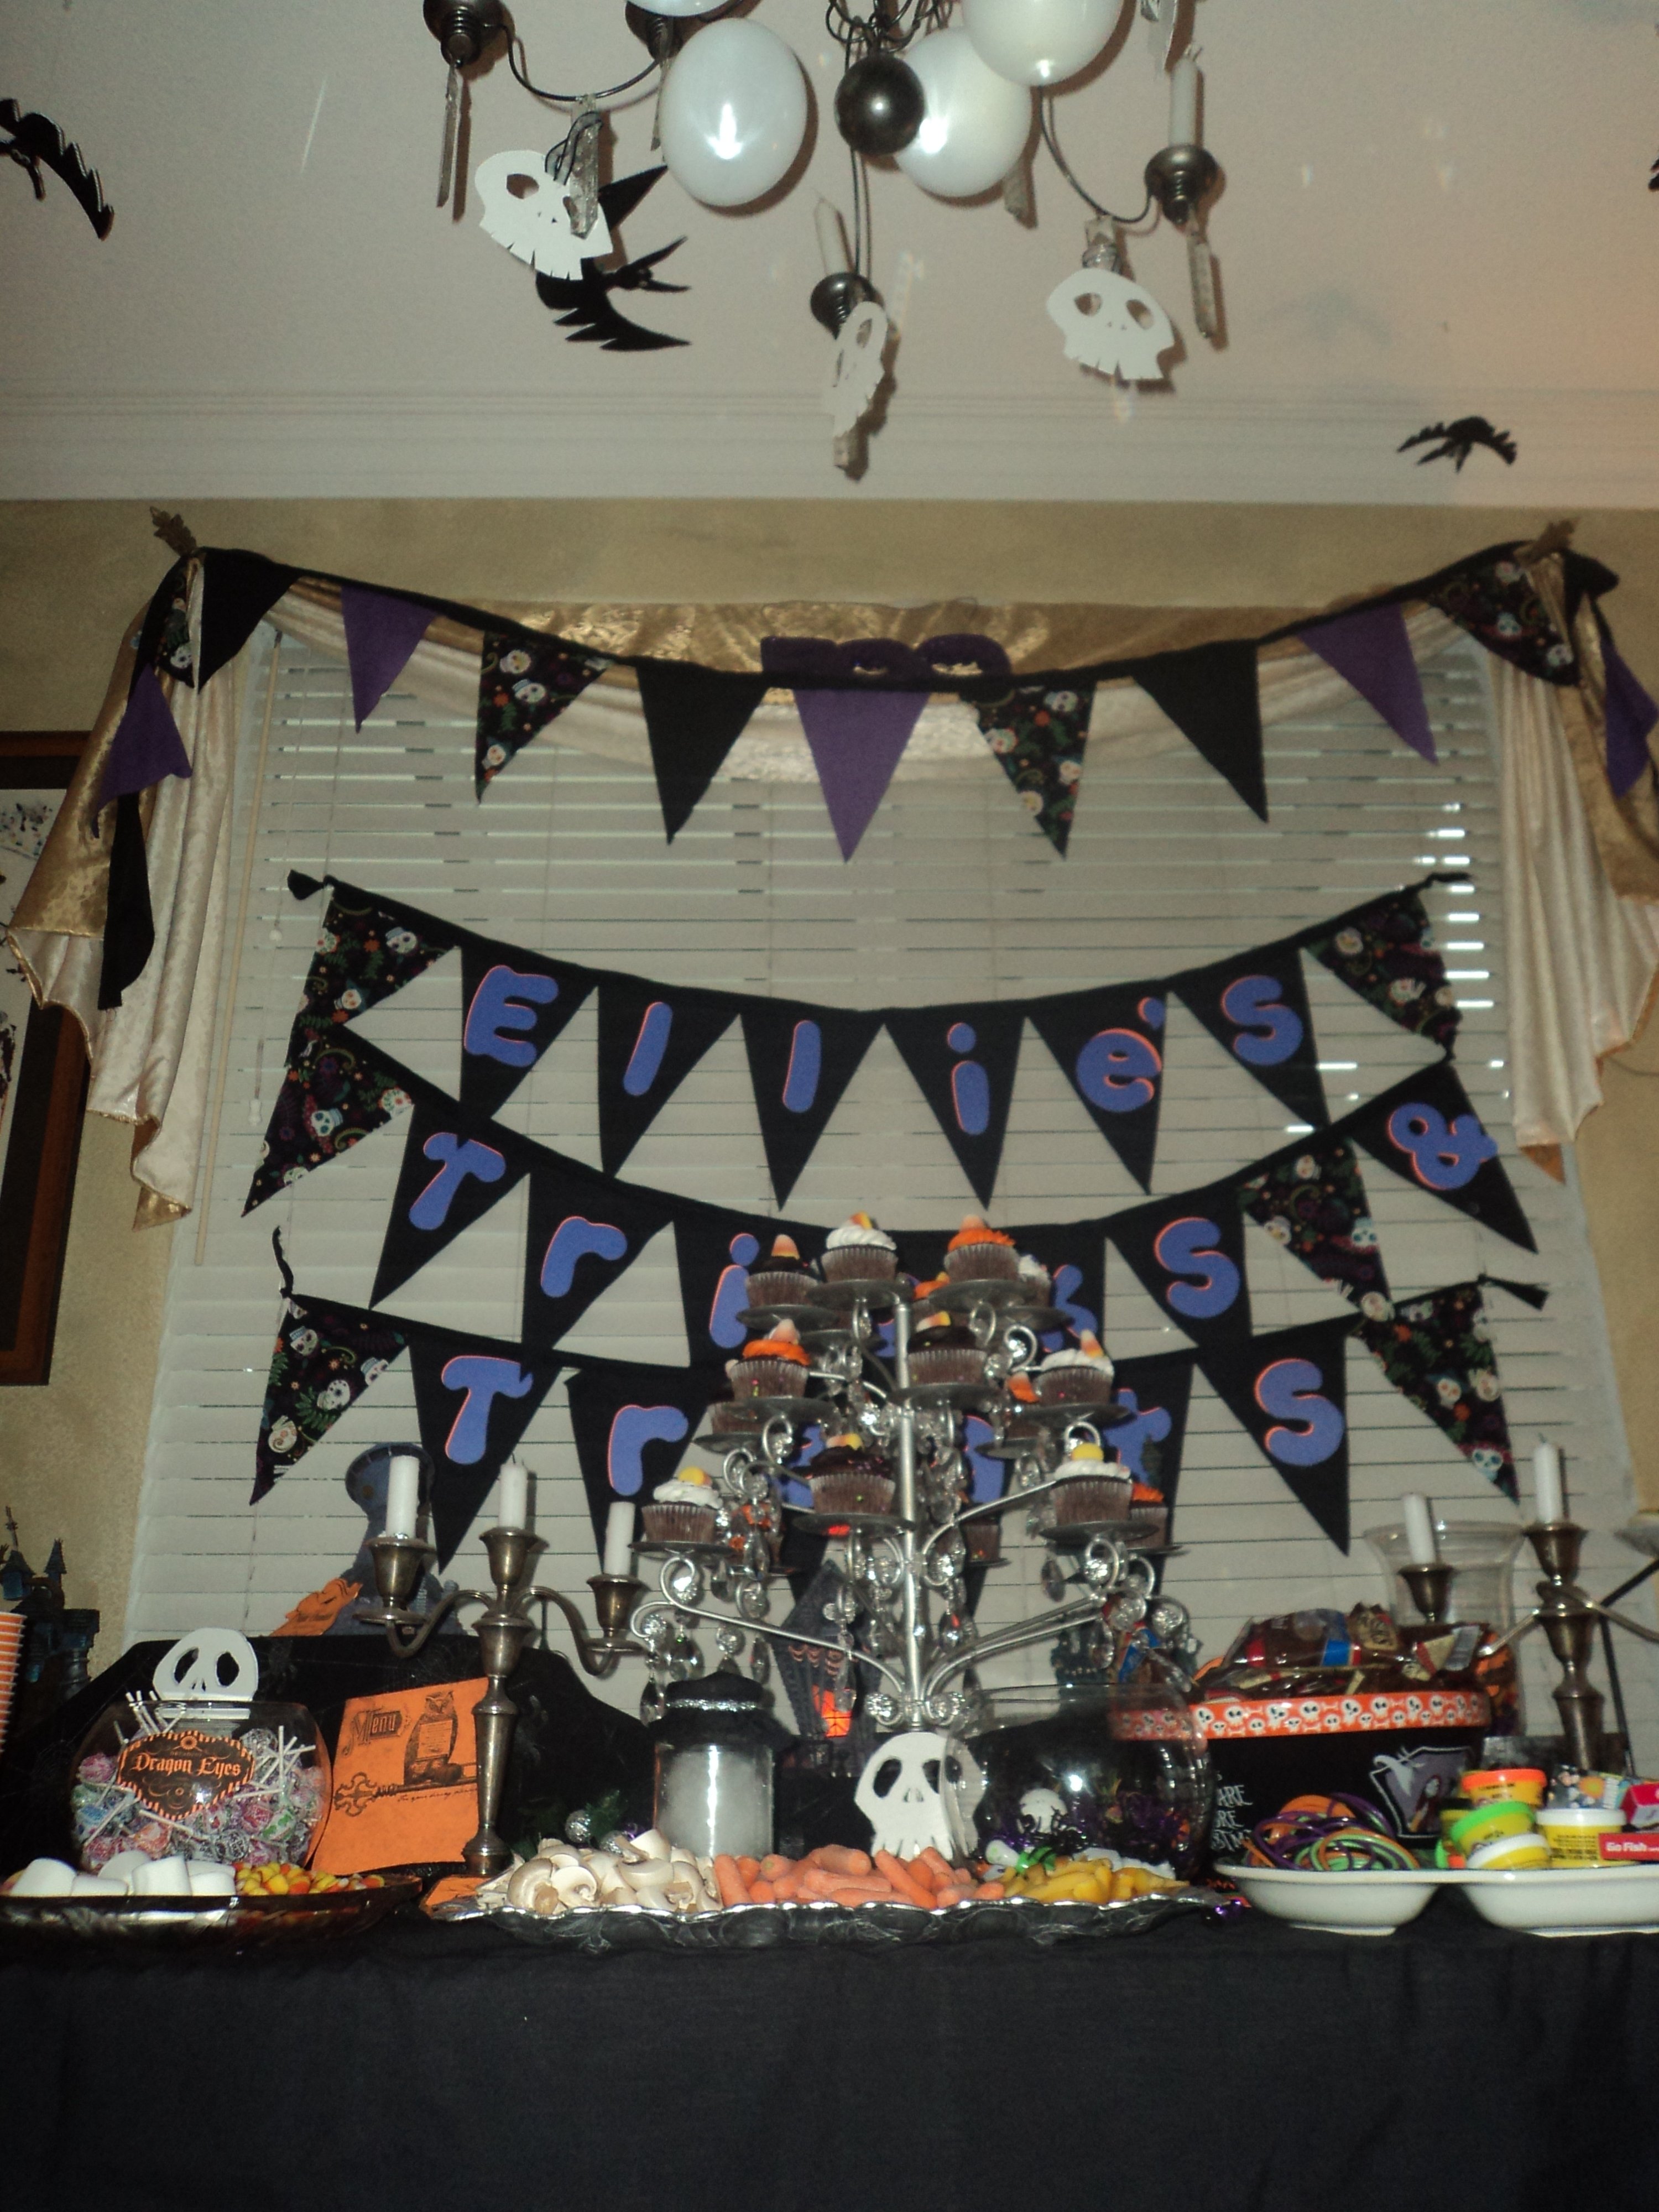 10 Lovable Nightmare Before Christmas Party Ideas nightmare before christmas birthday party revisited author 2022